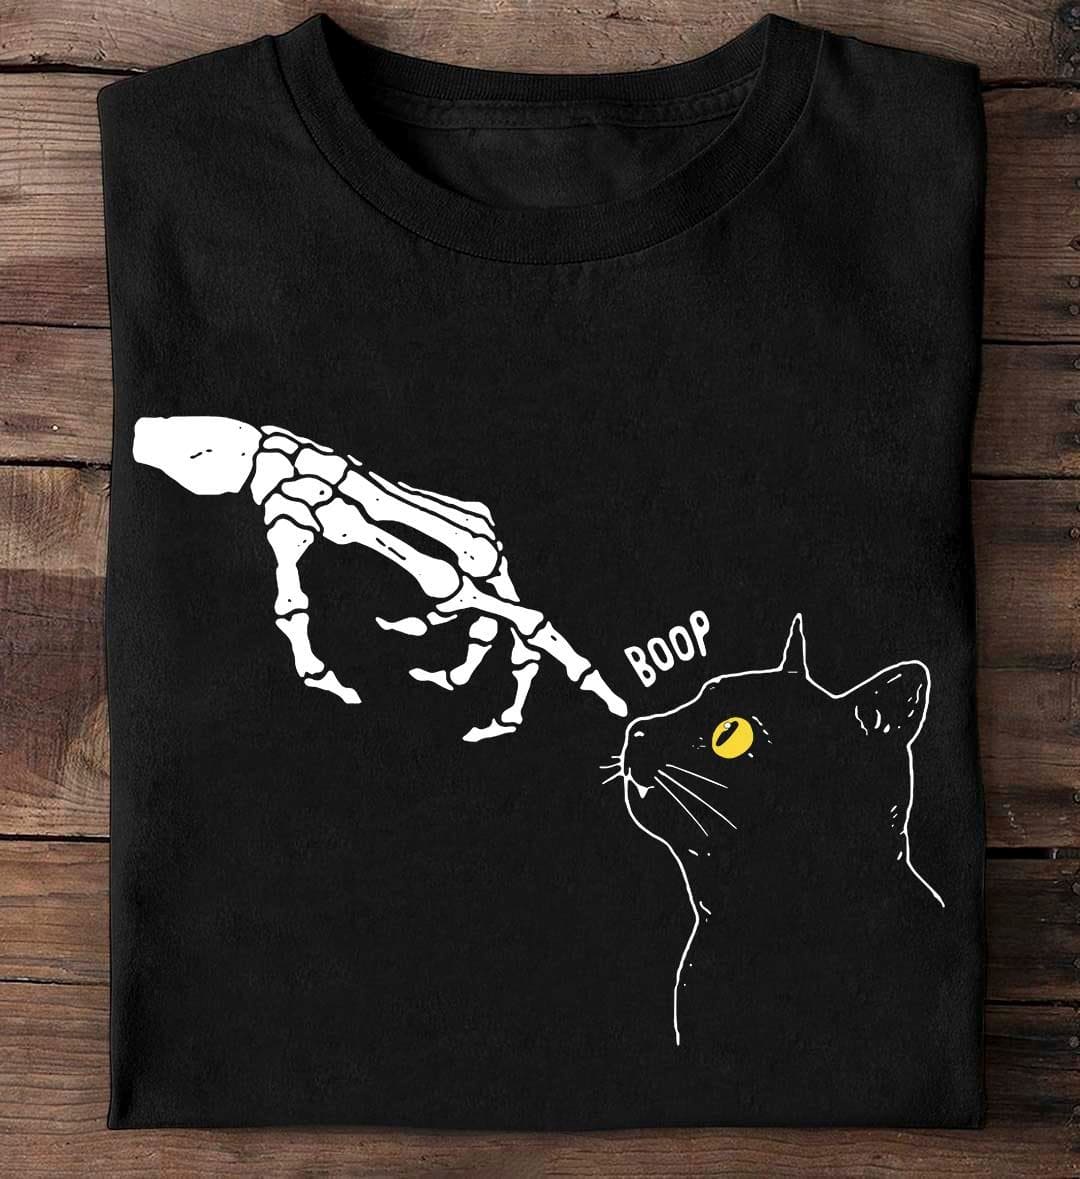 Skull playing with cats - Gift for cat lover, black cat graphic